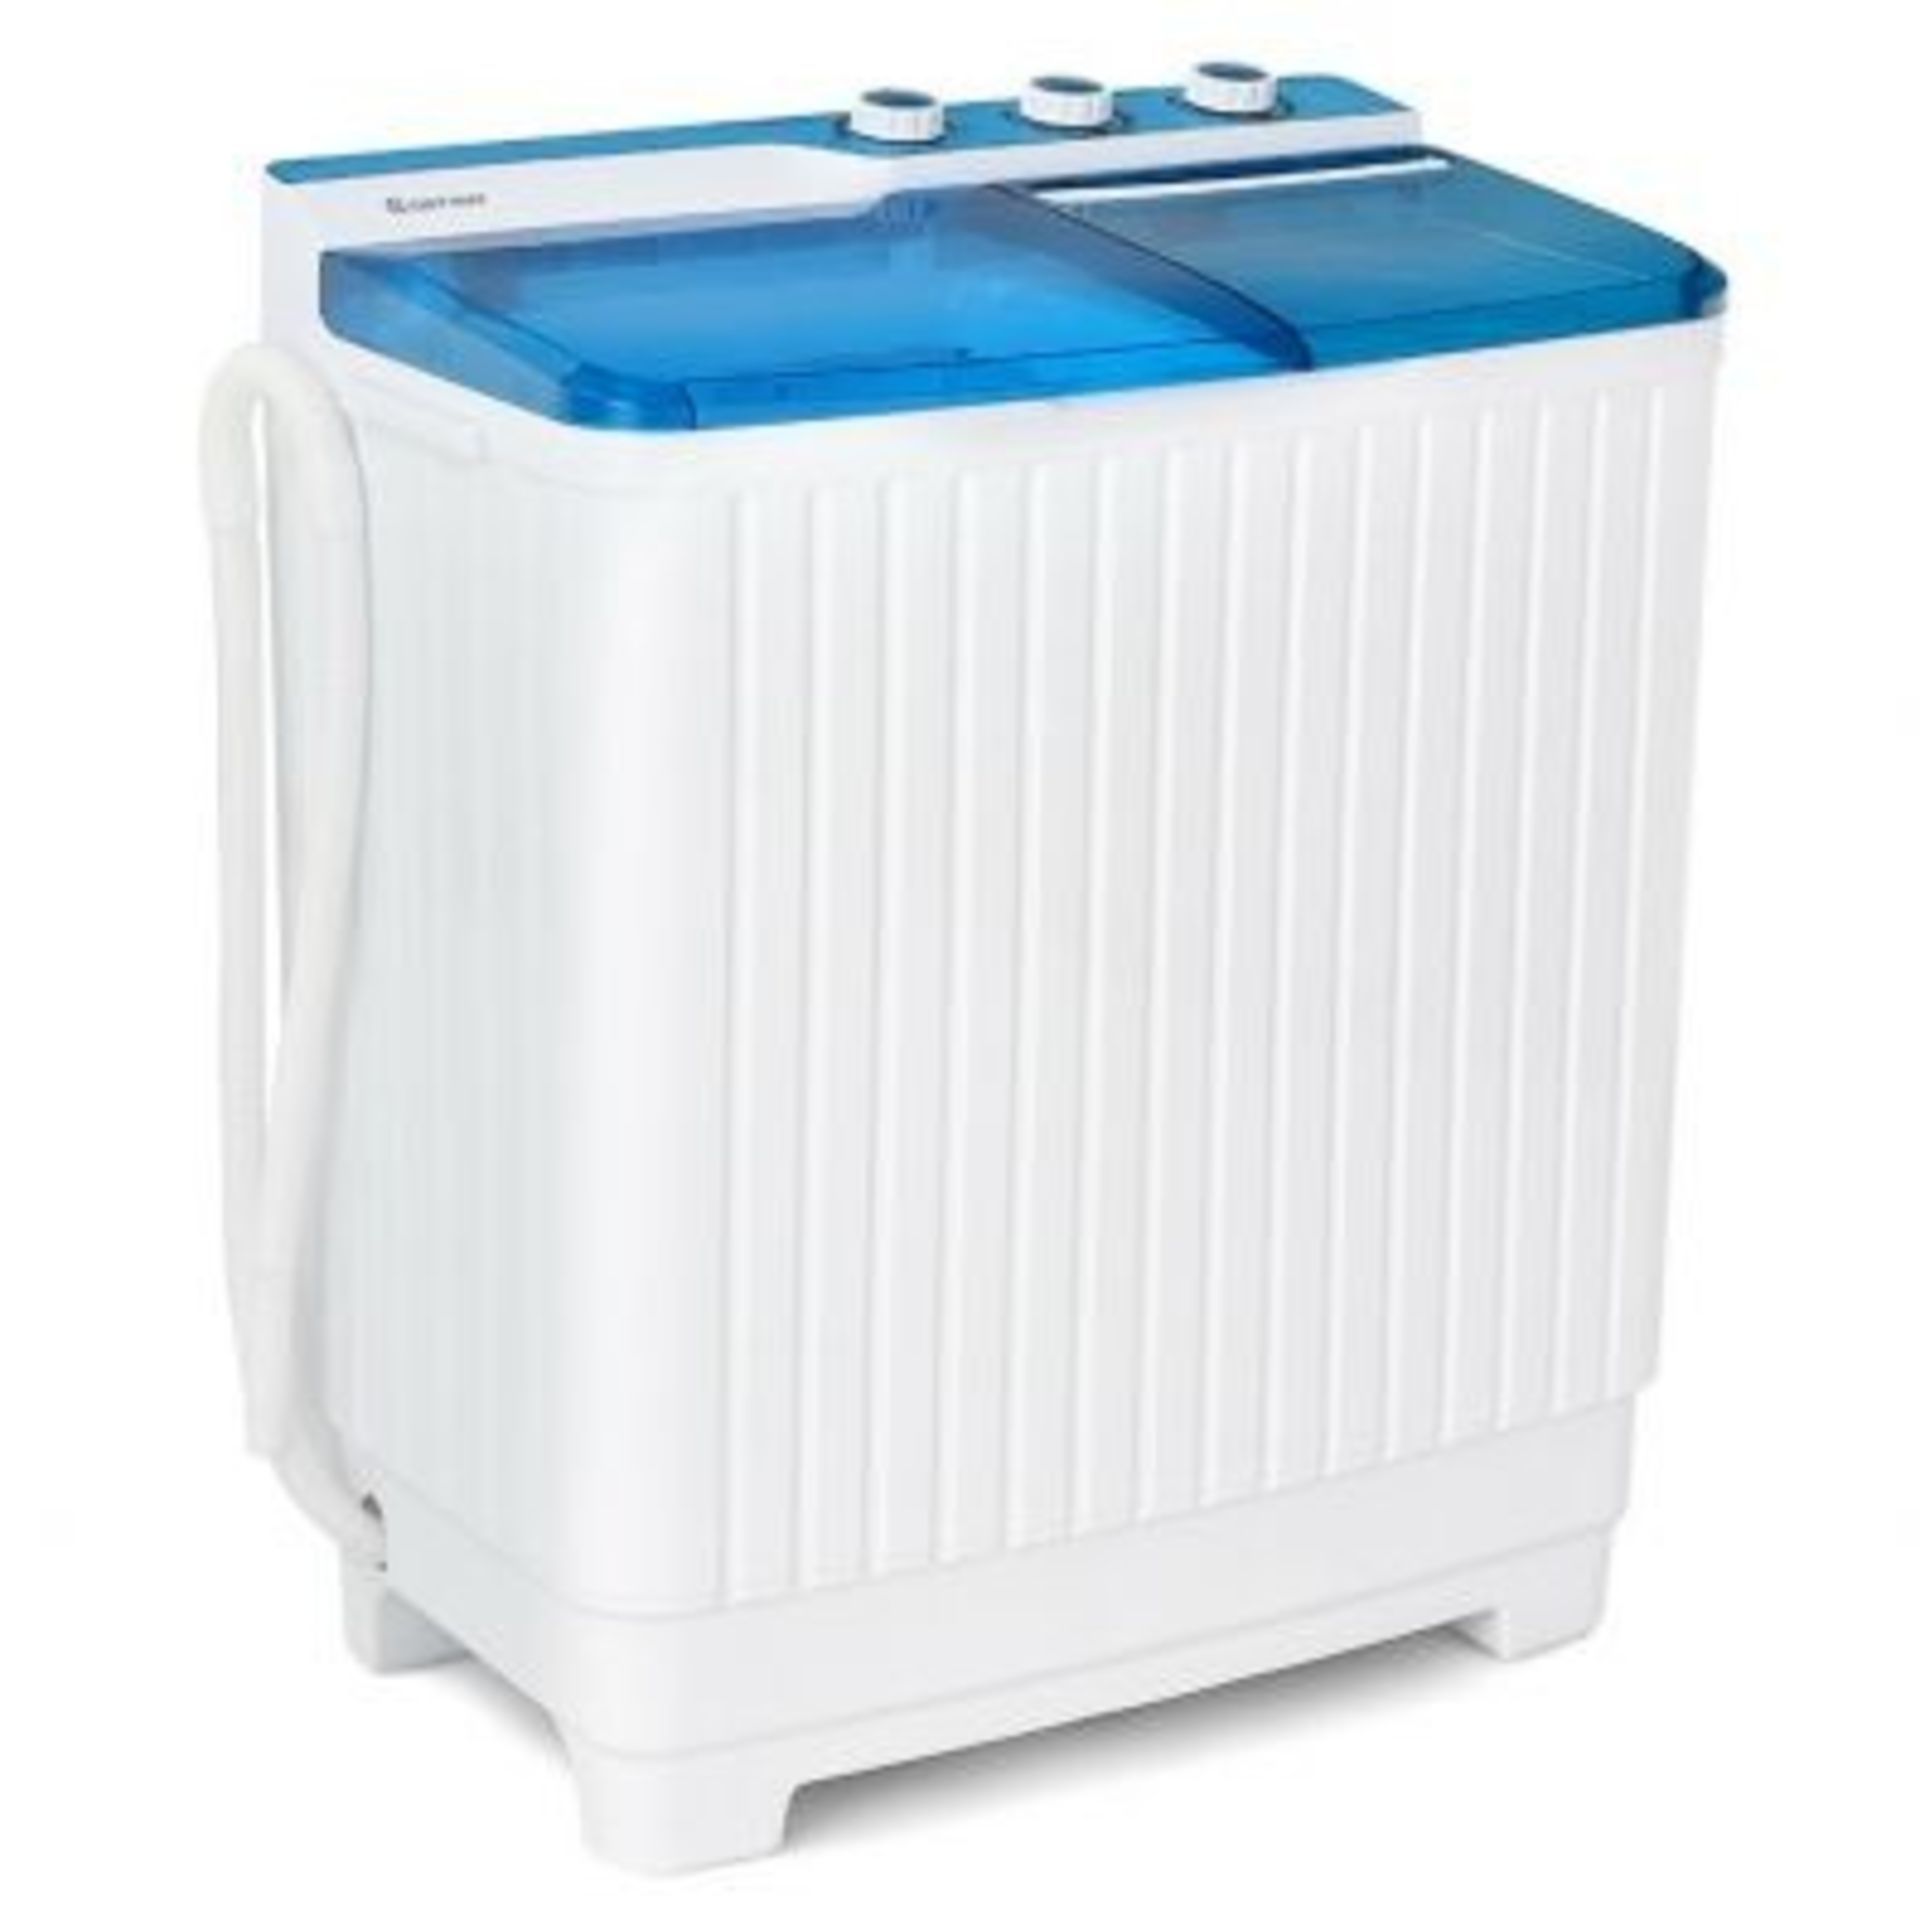 Portable Washer and Spin Dryer Combo with Timer Control for Apartment R13-16